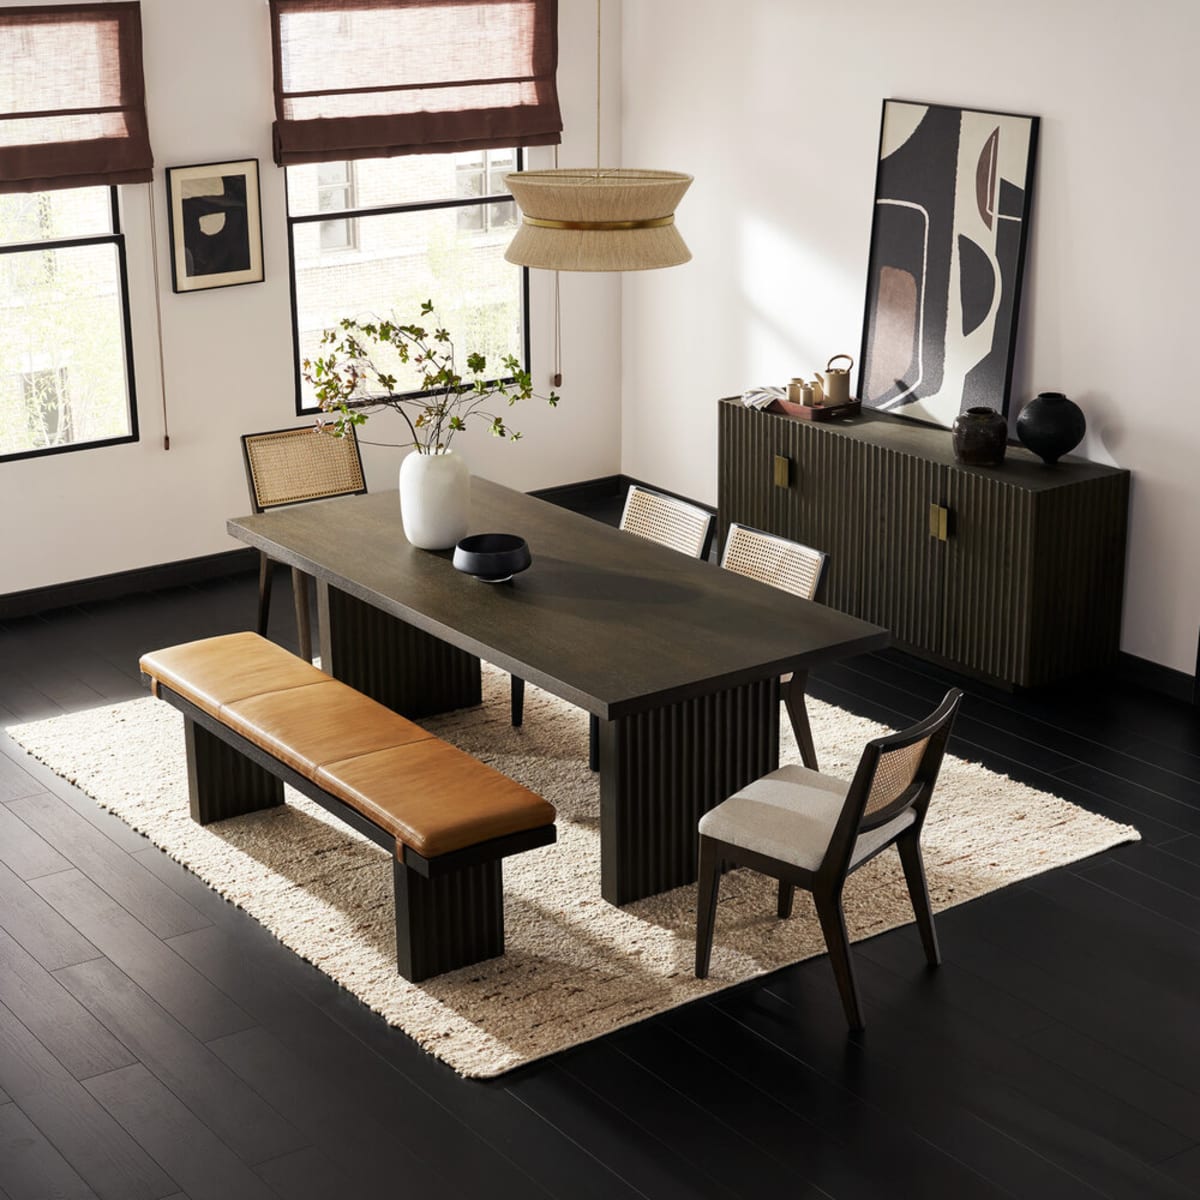 9 Small Dining Table Options for Equally Small Spaces, According